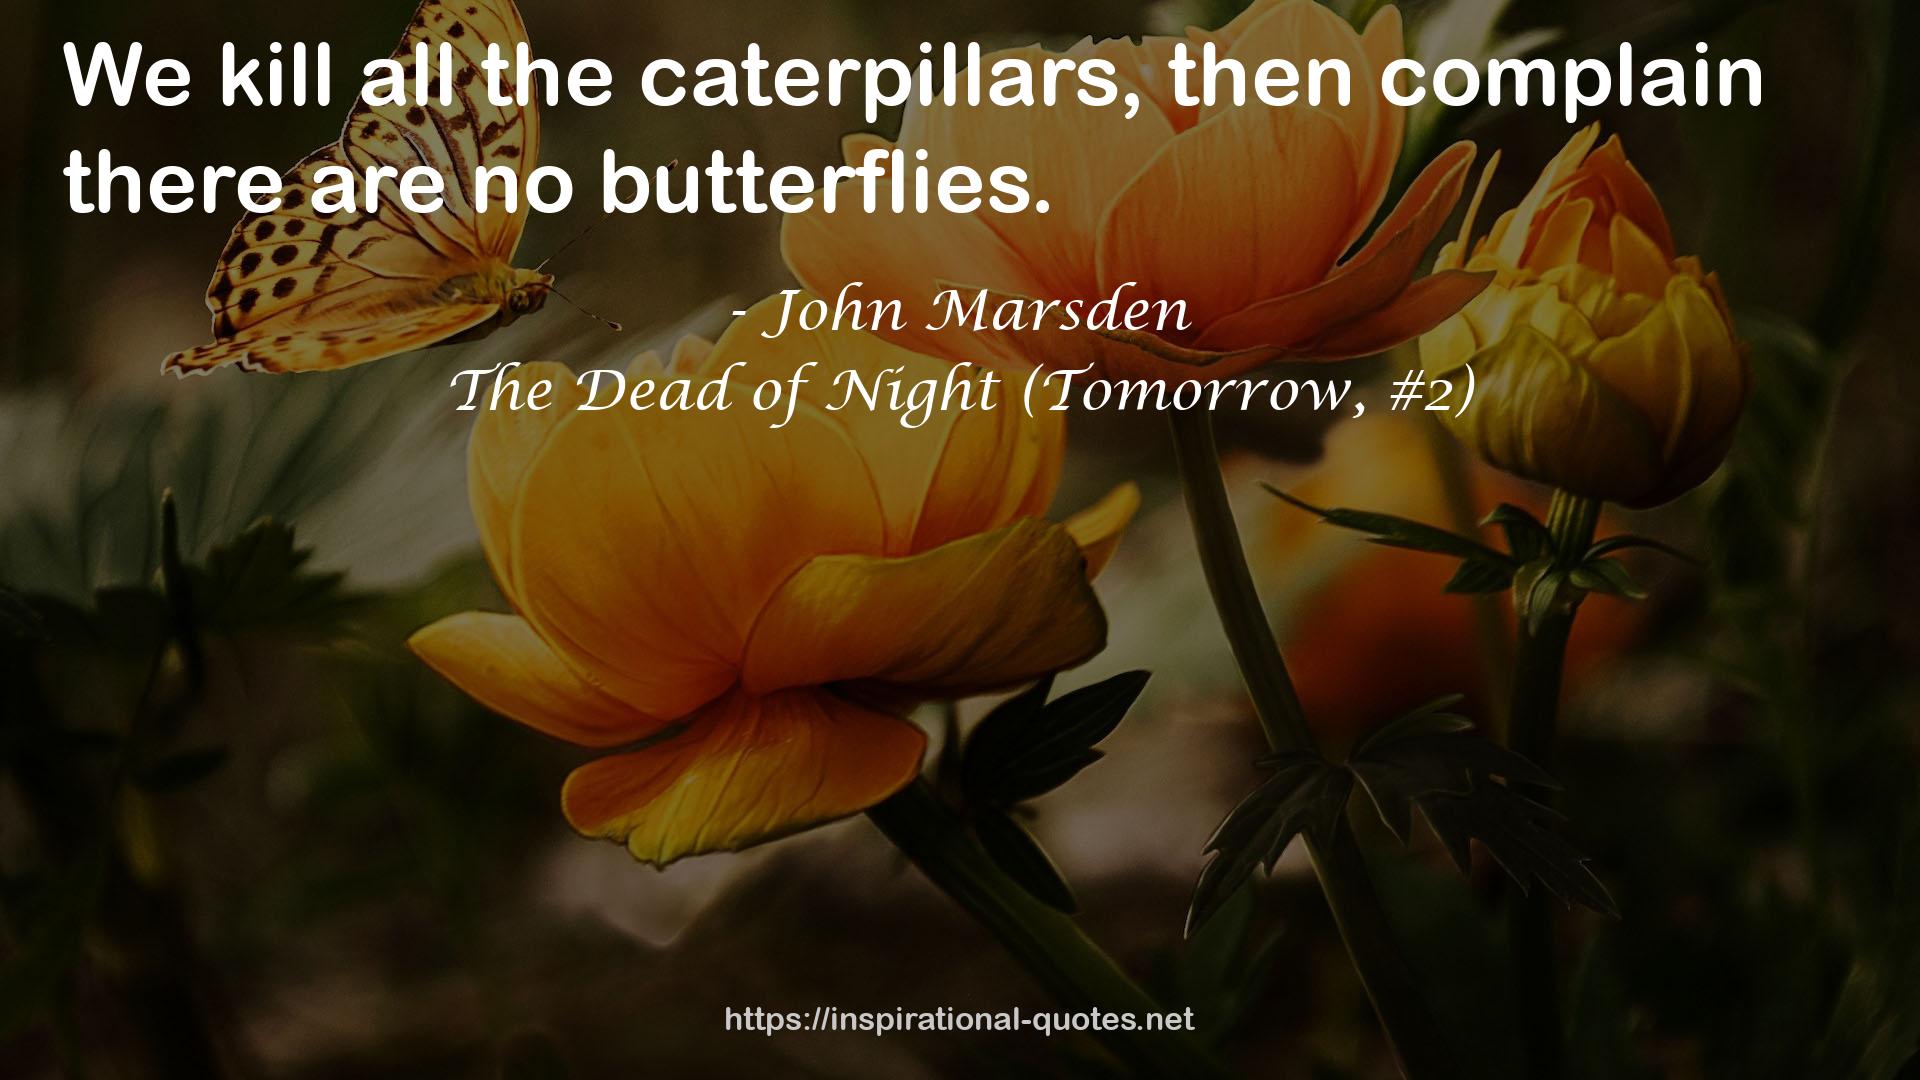 The Dead of Night (Tomorrow, #2) QUOTES